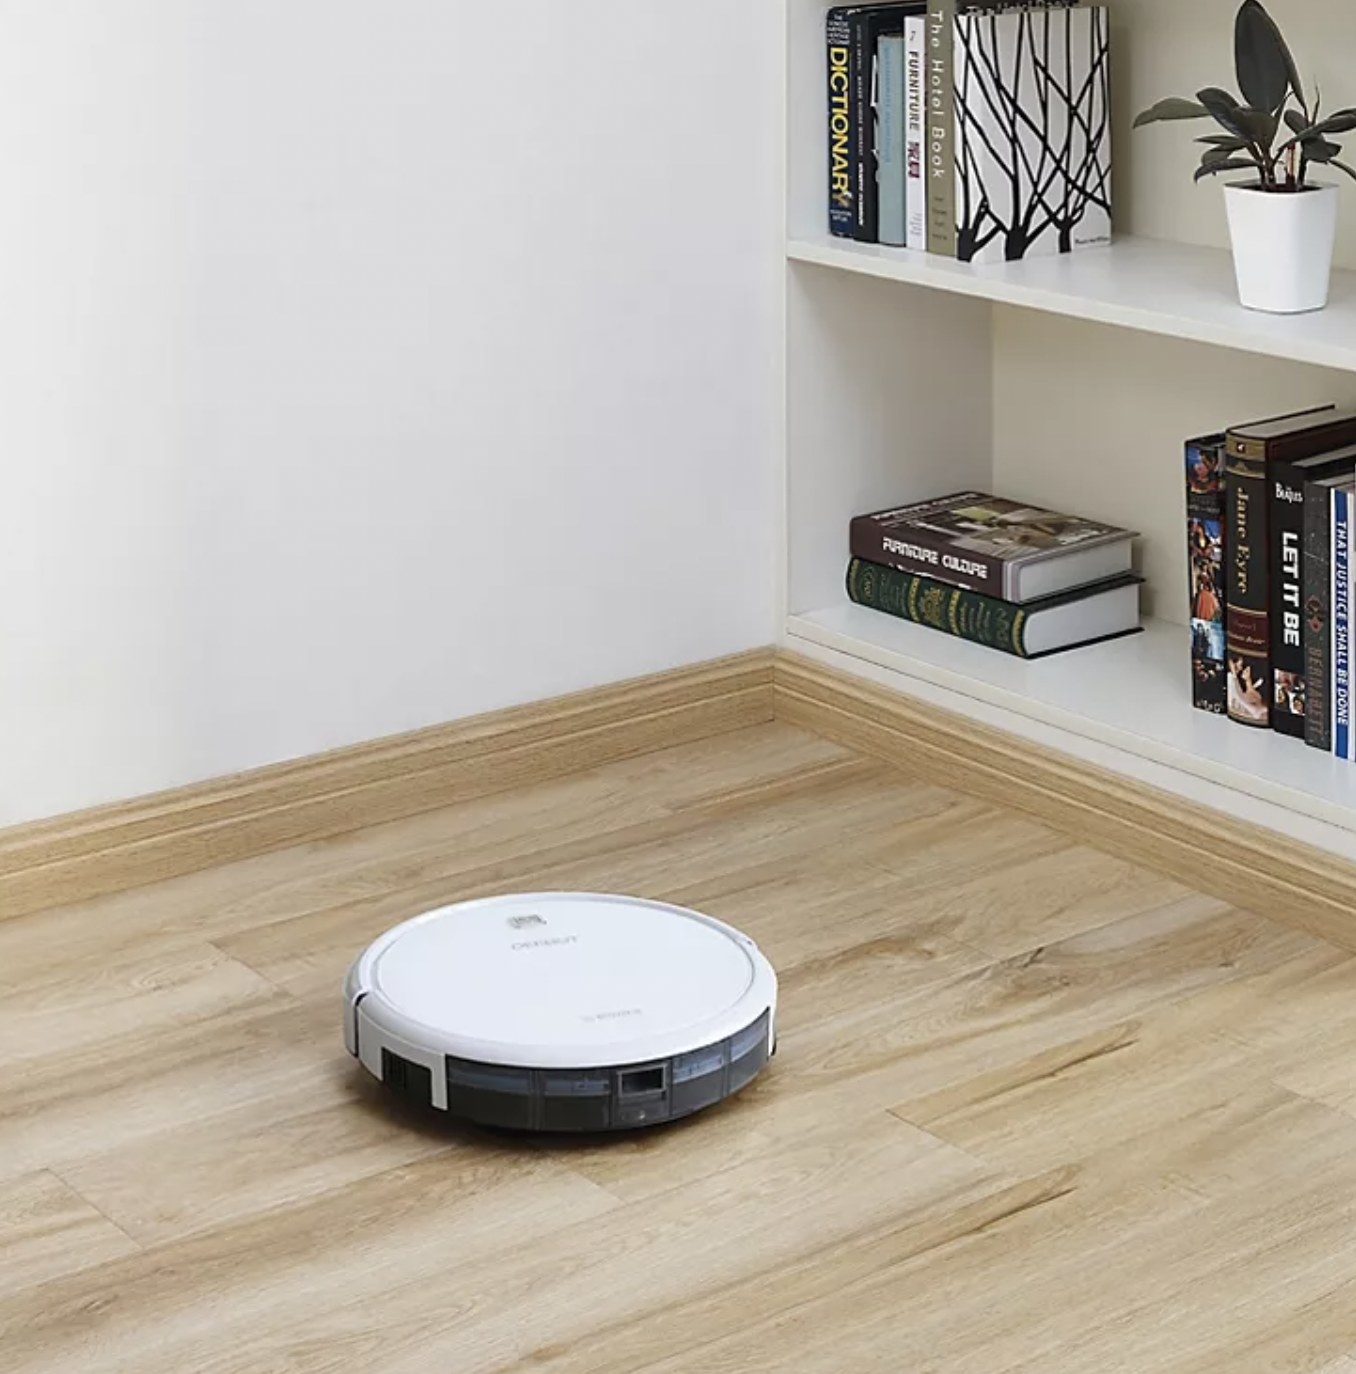 the white robot vacuum cleaning a hardwood floor